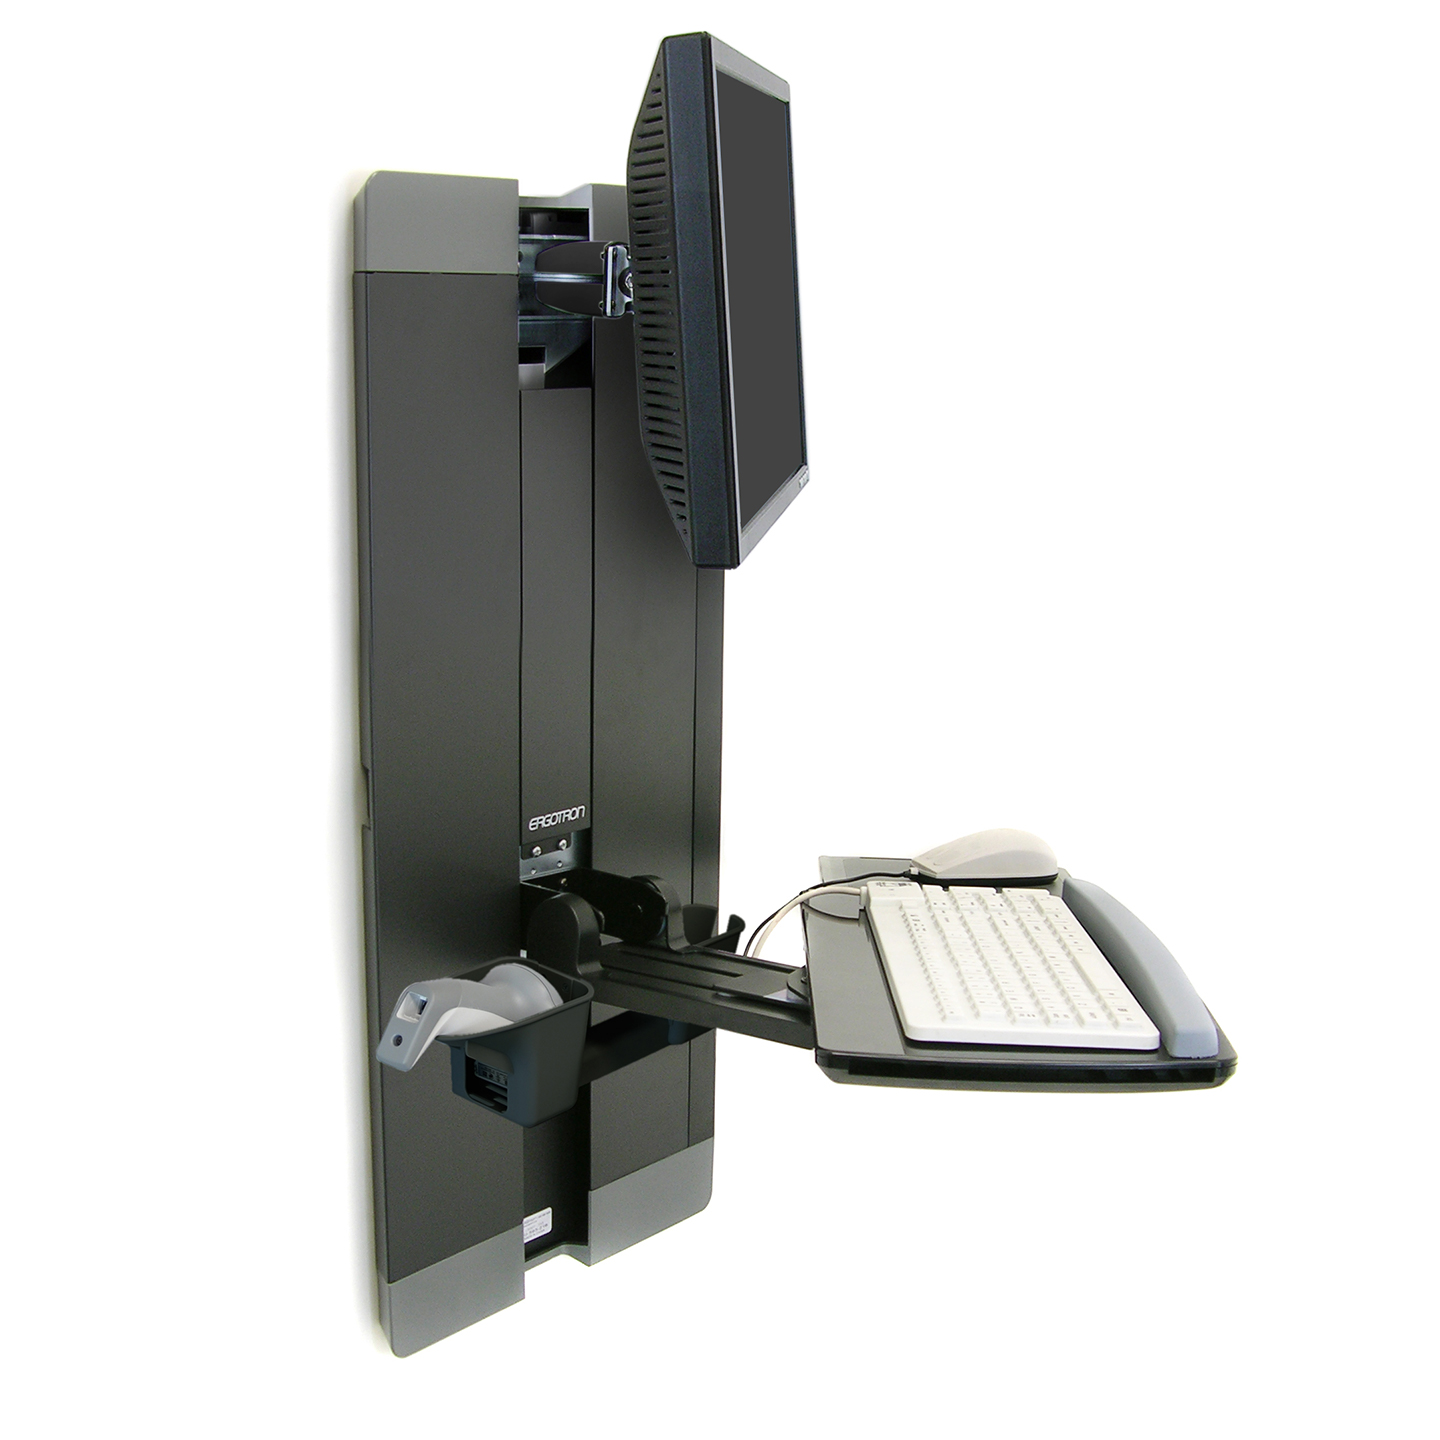 Haworth StyleView Sit to Stand Workspace in black with height adjustable monitor and key board